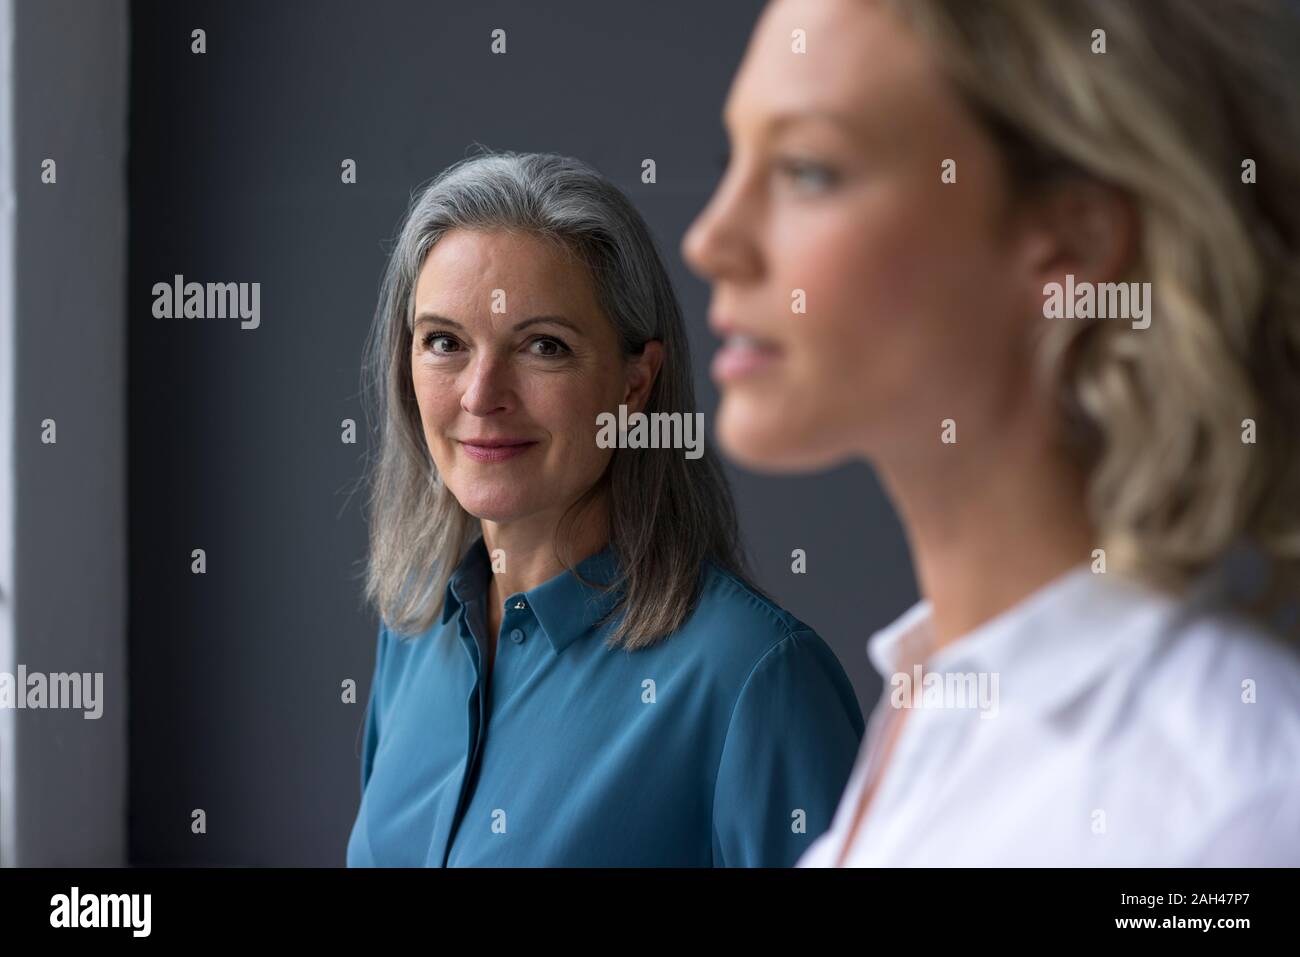 Portrait of confident mature businesswoman with young businesswoman in foreground Stock Photo